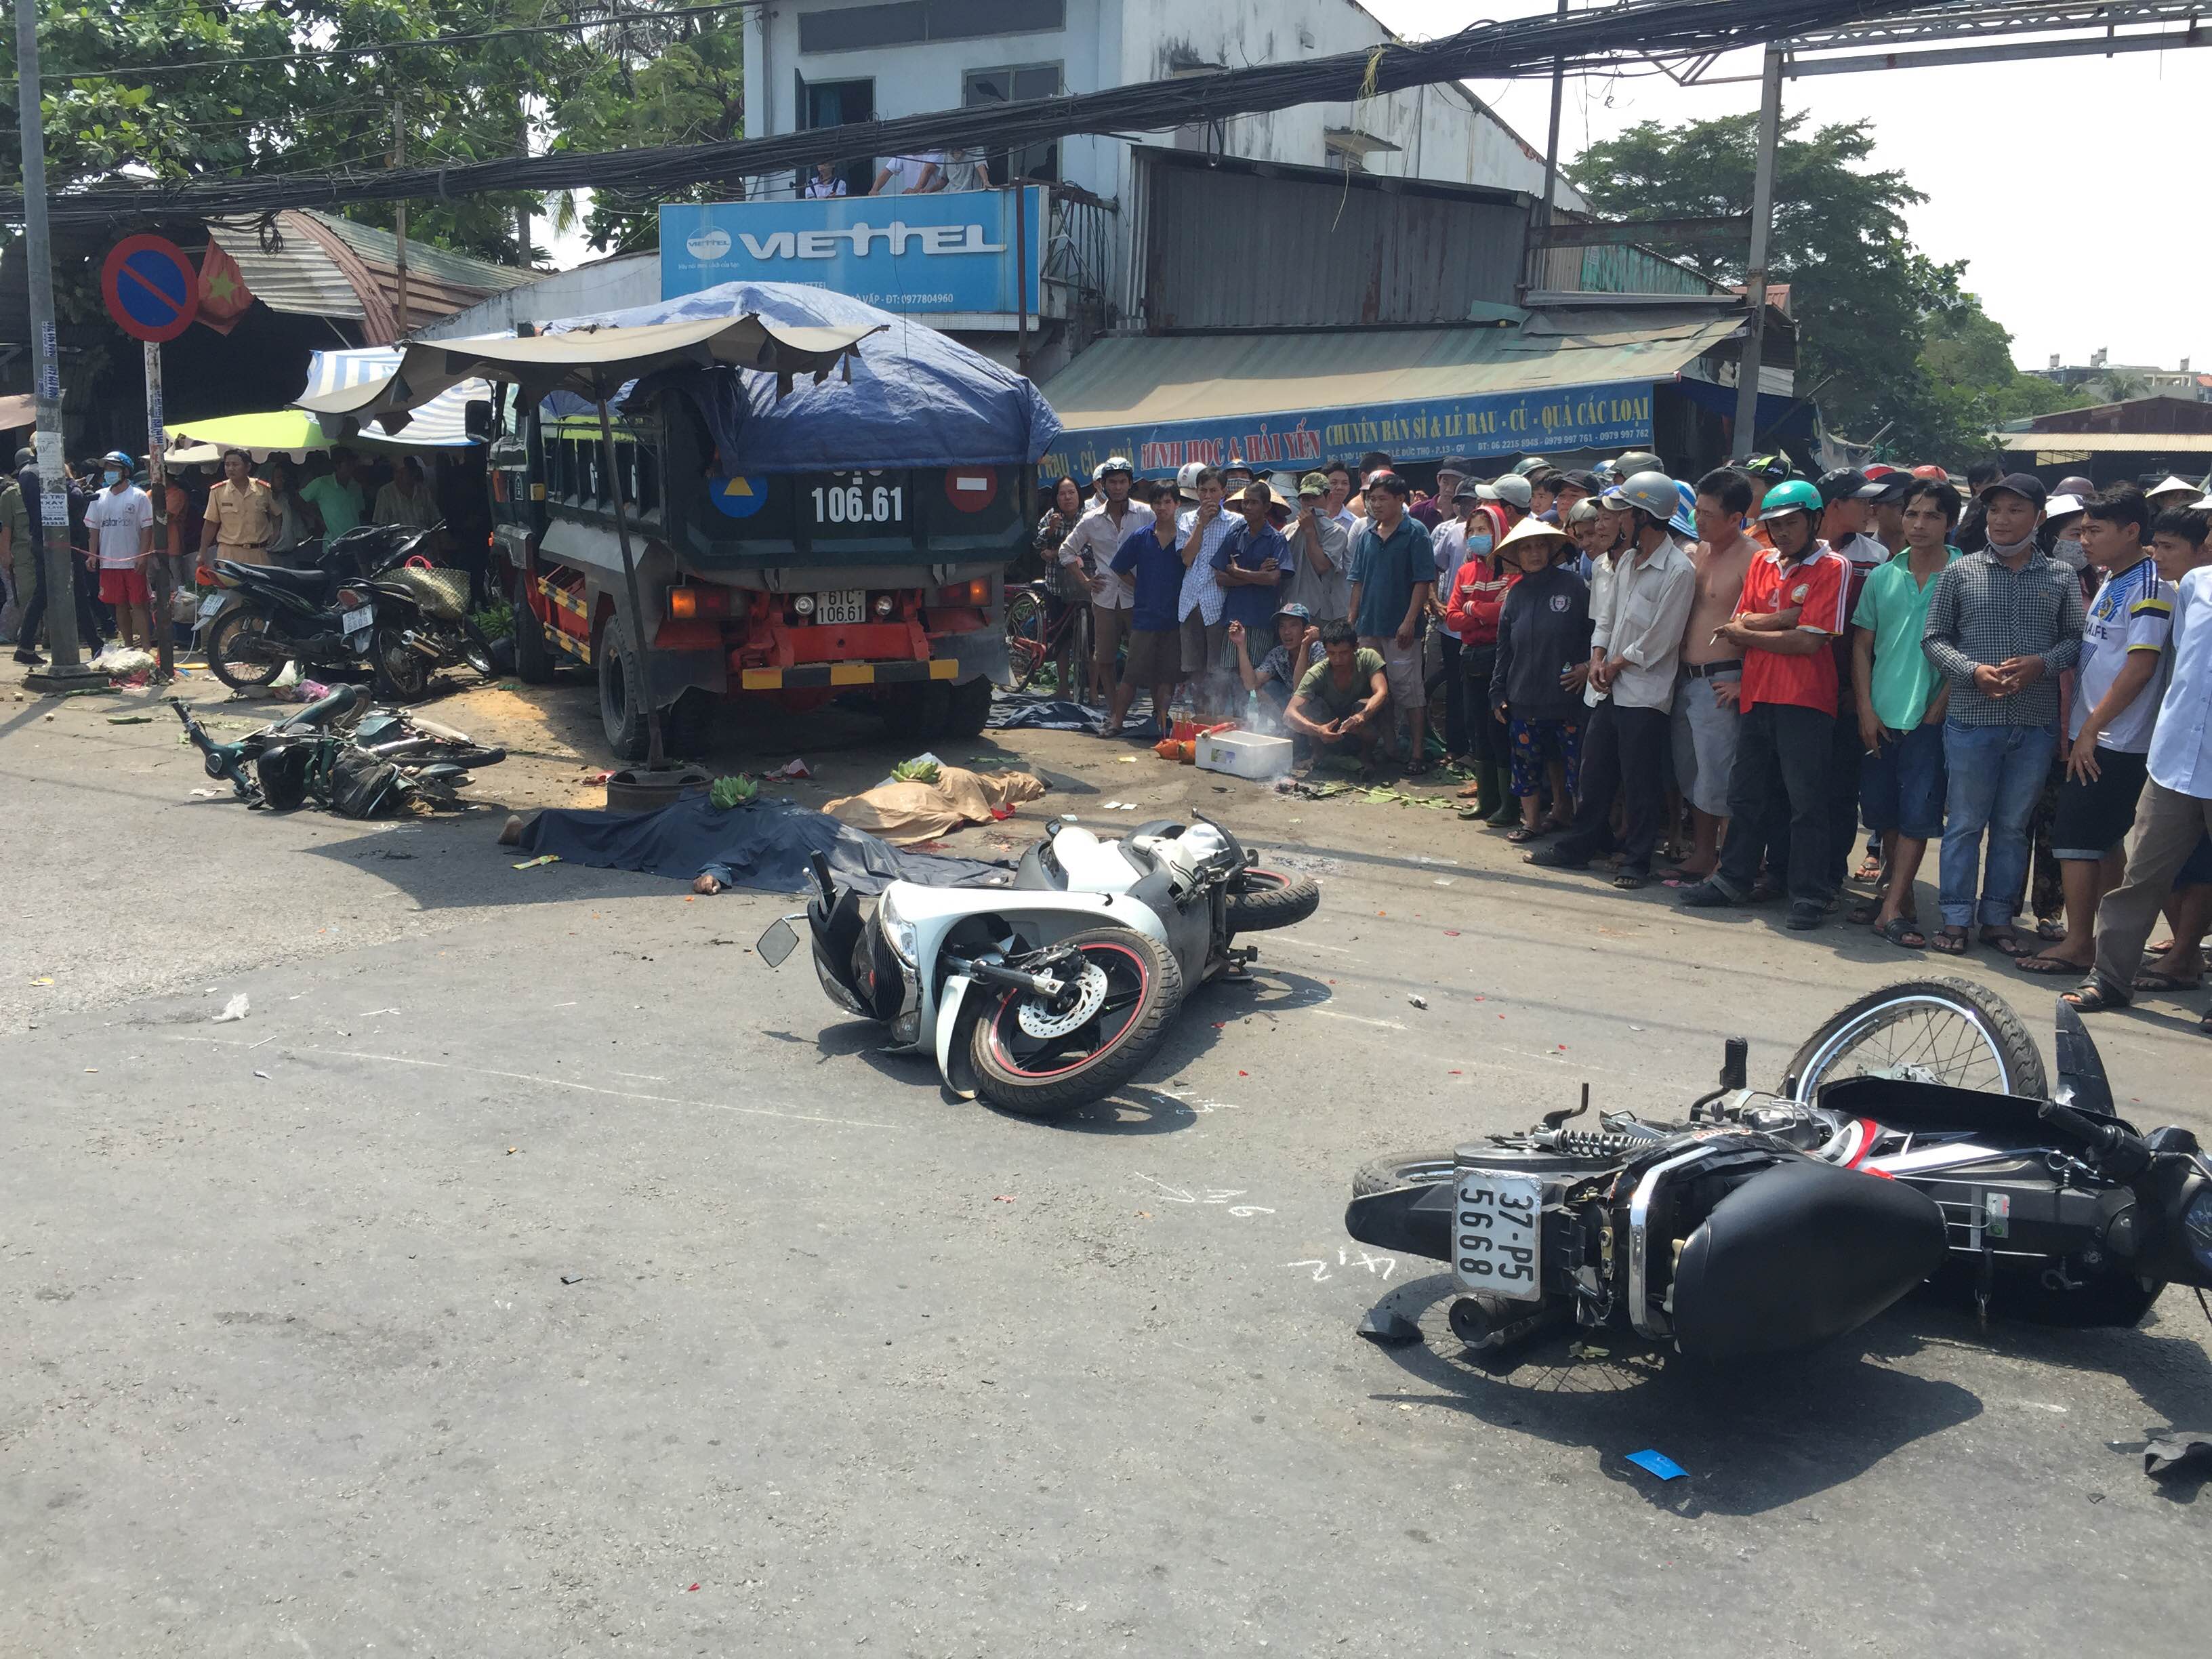 Two killed as tipper truck crashes into crowd after descending bridge in Vietnam